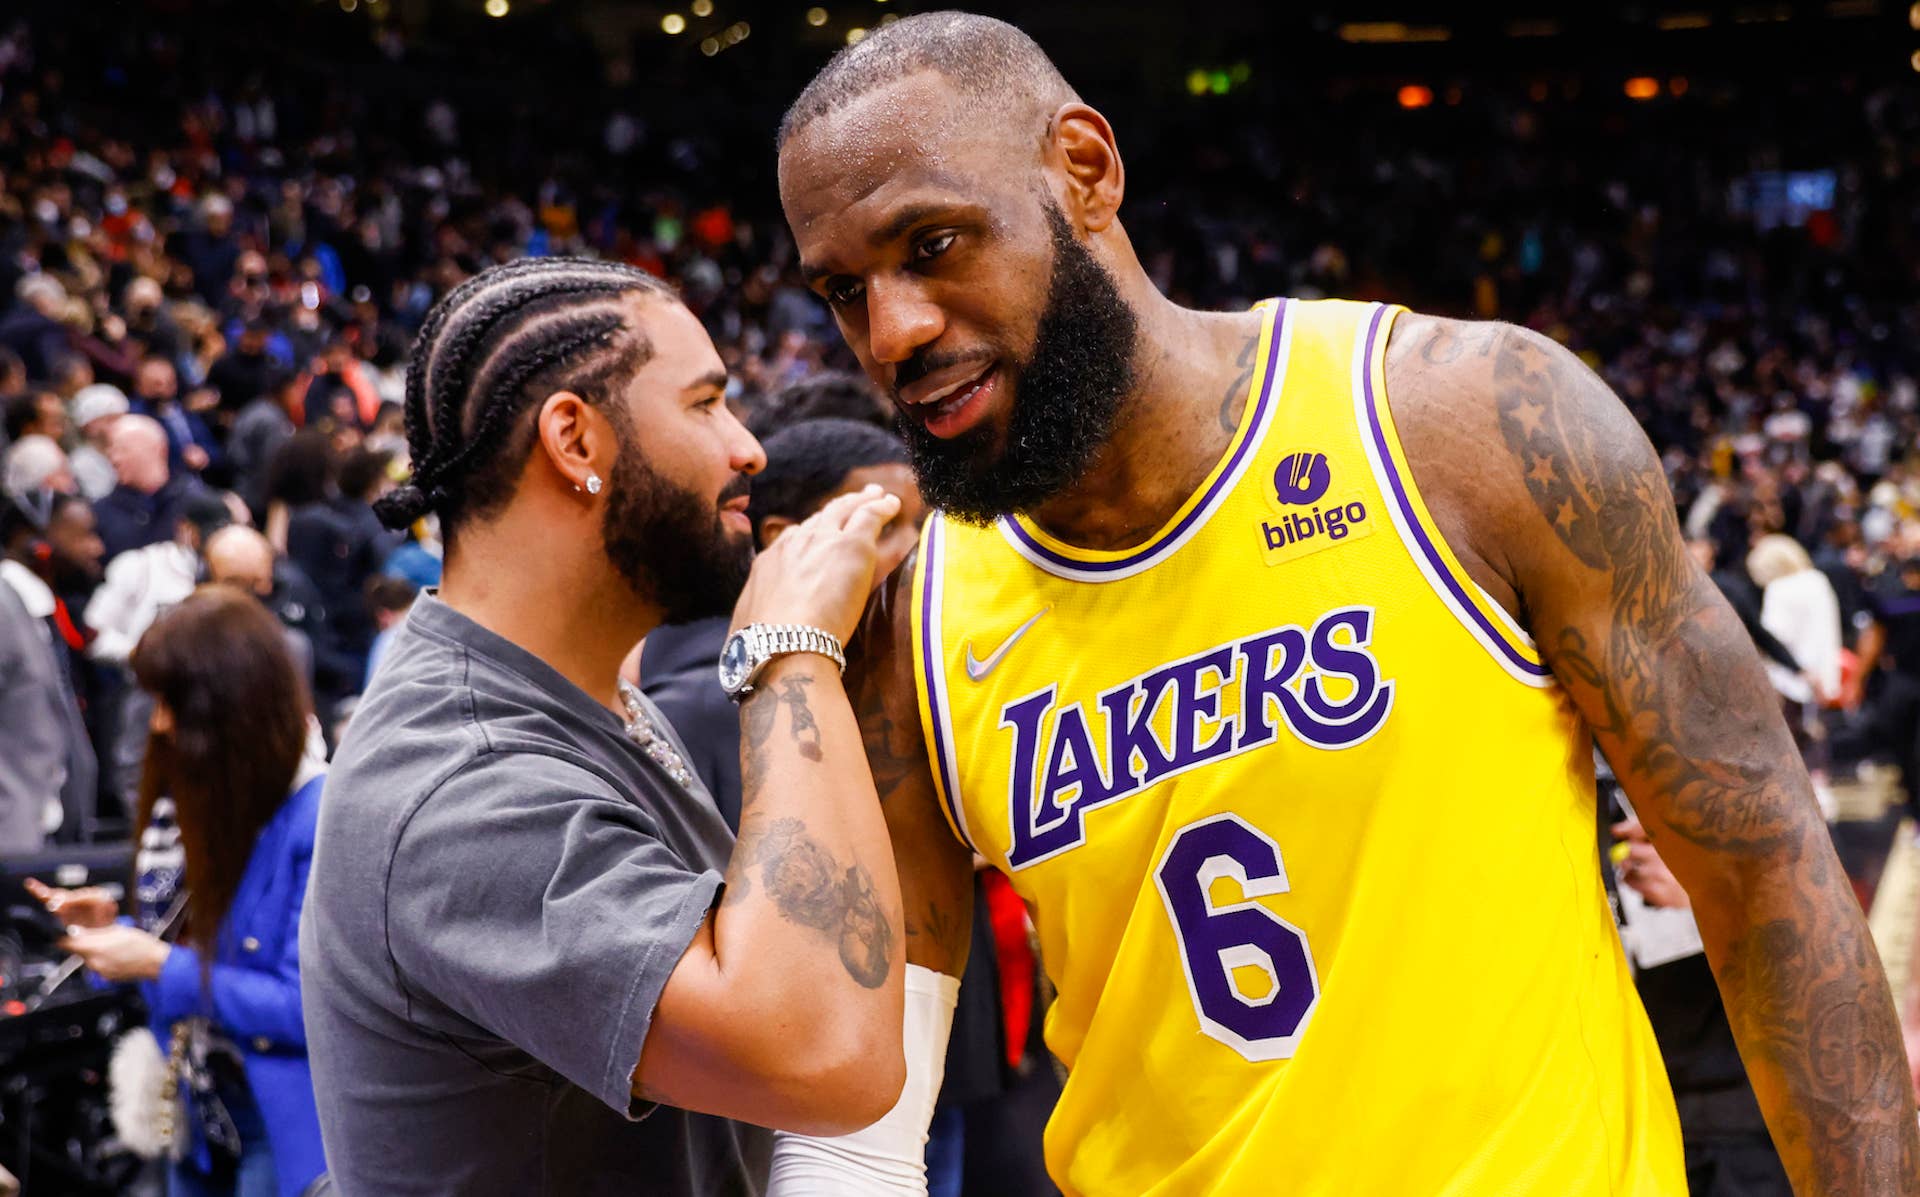 Drake and LeBron courtside during a March 2022 game between the Lakers and Raptors